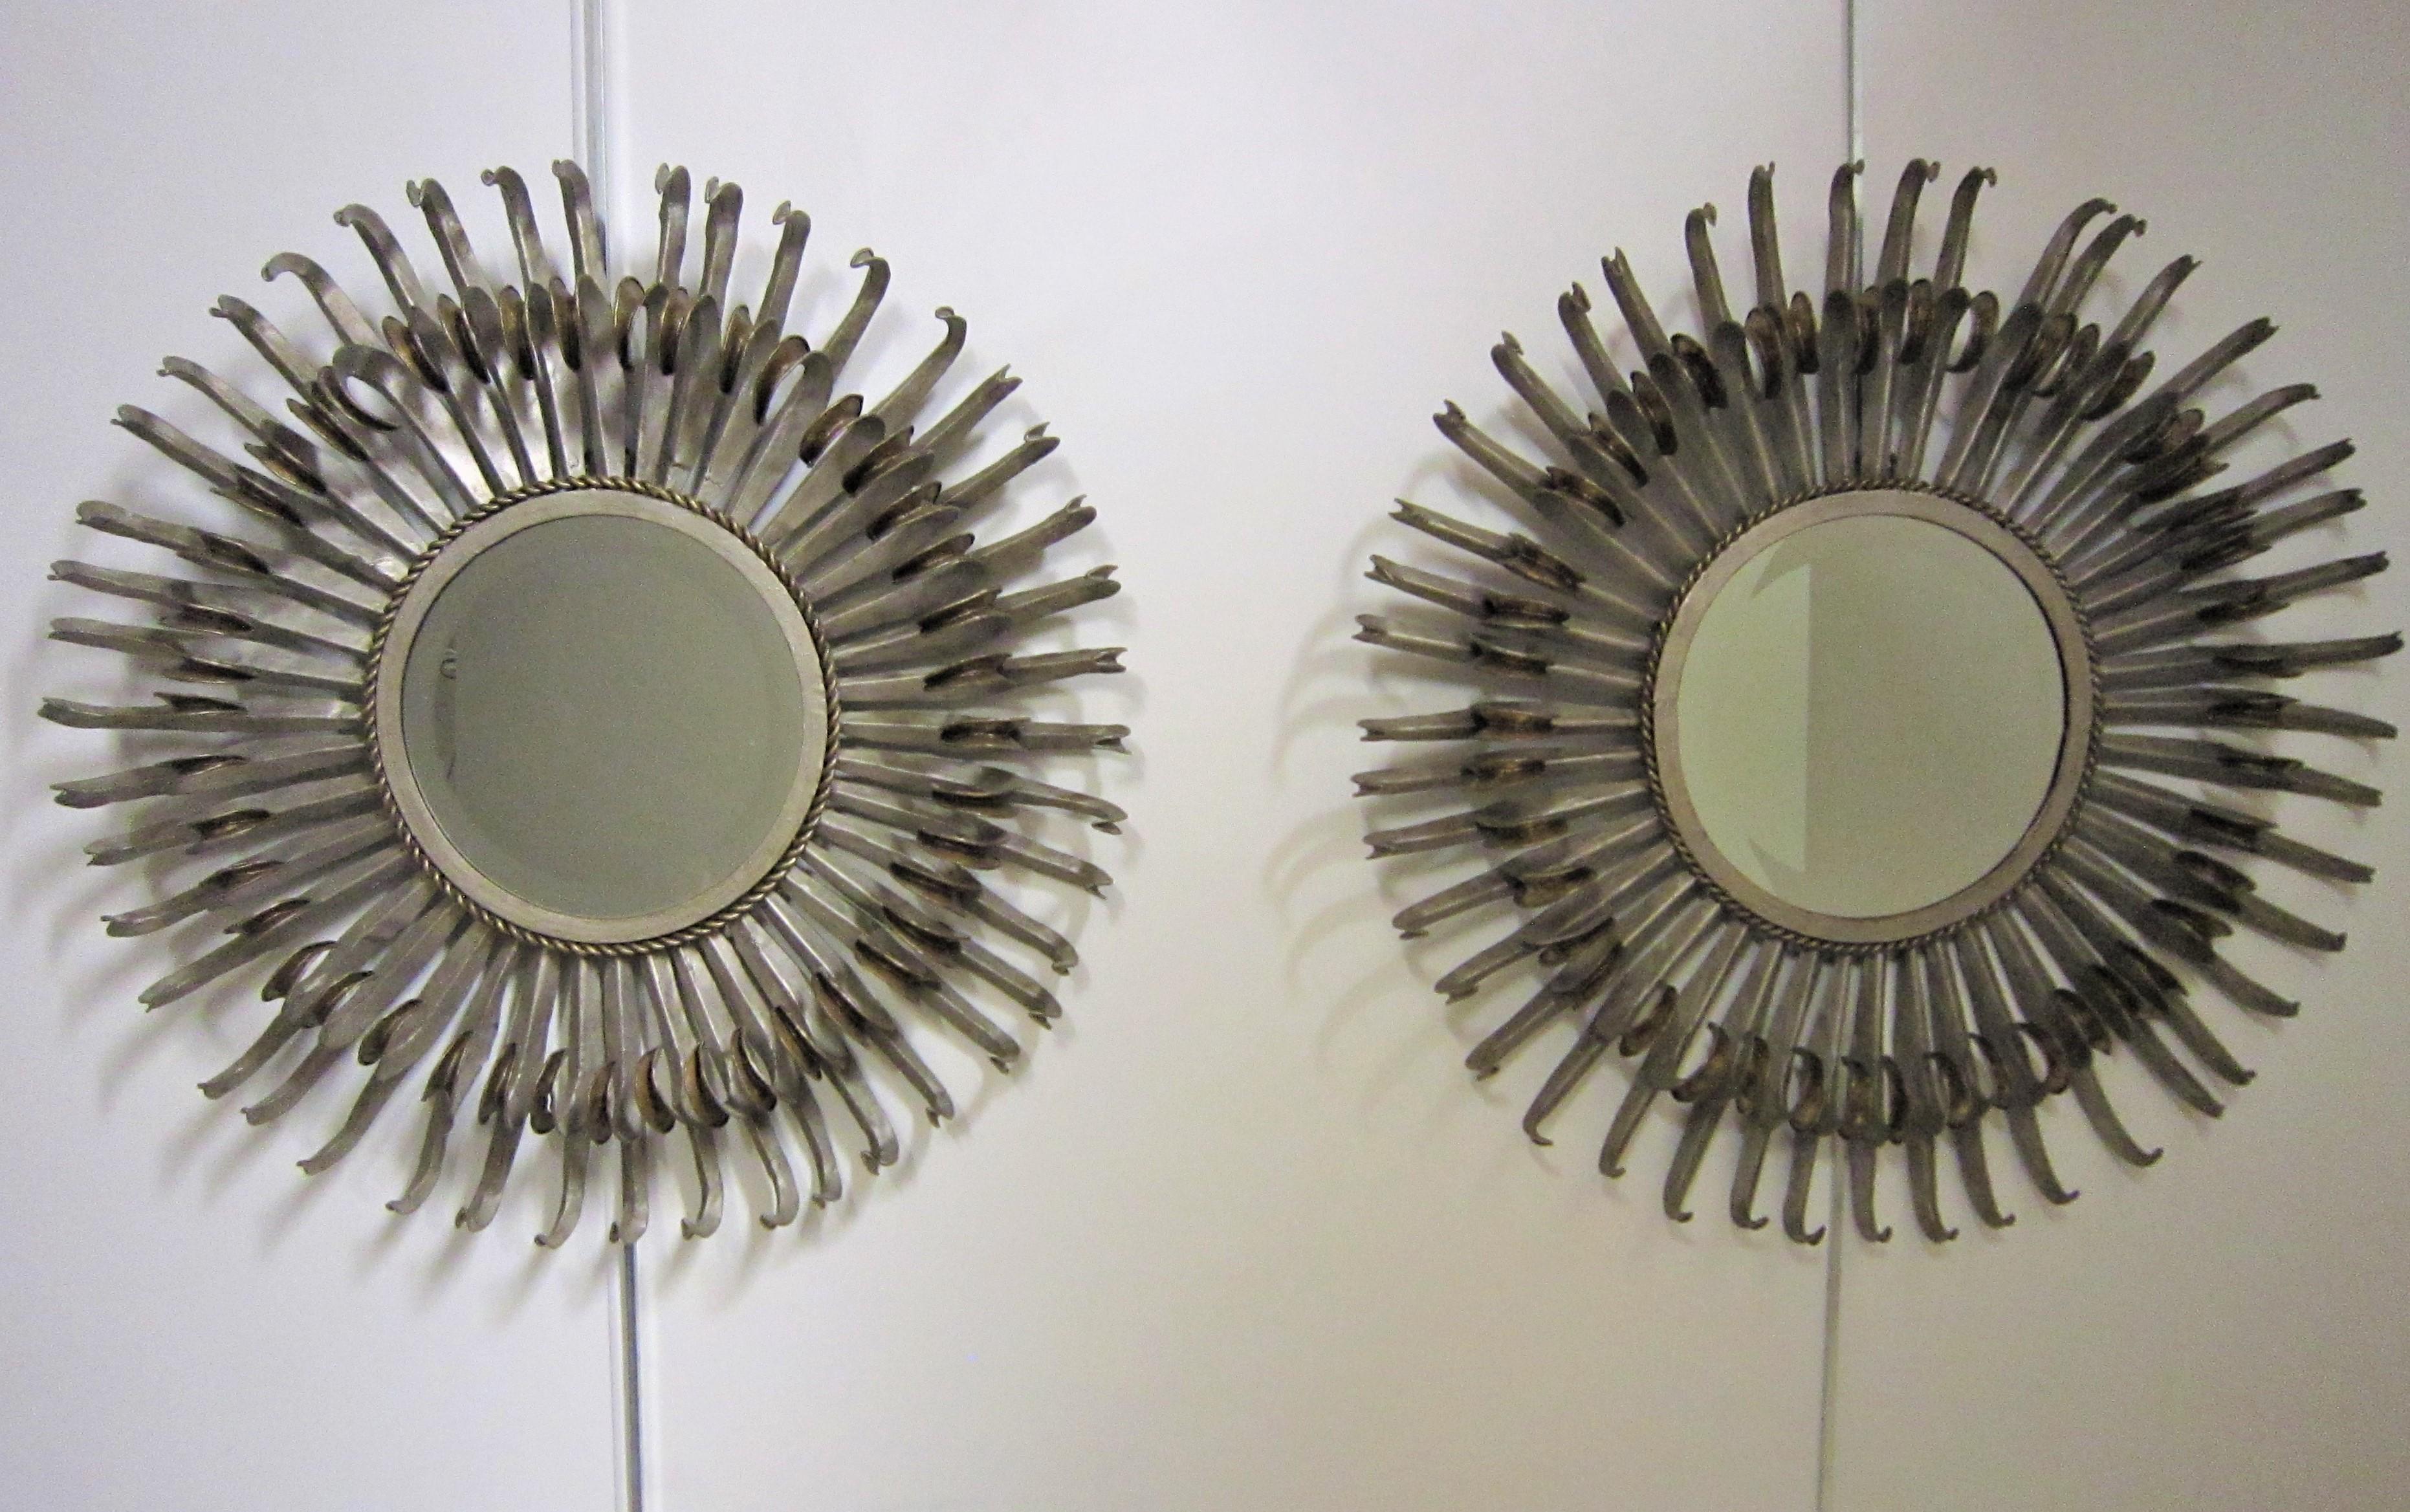 Original pair of French double tiered, two-tone ray mirrors.
Curled eyelash edges in silver leaf and patinated dark gilt iron adorn this soleil mirror.
The original central beveled mirrored inset is surrounded by a gilt braided detail
Central